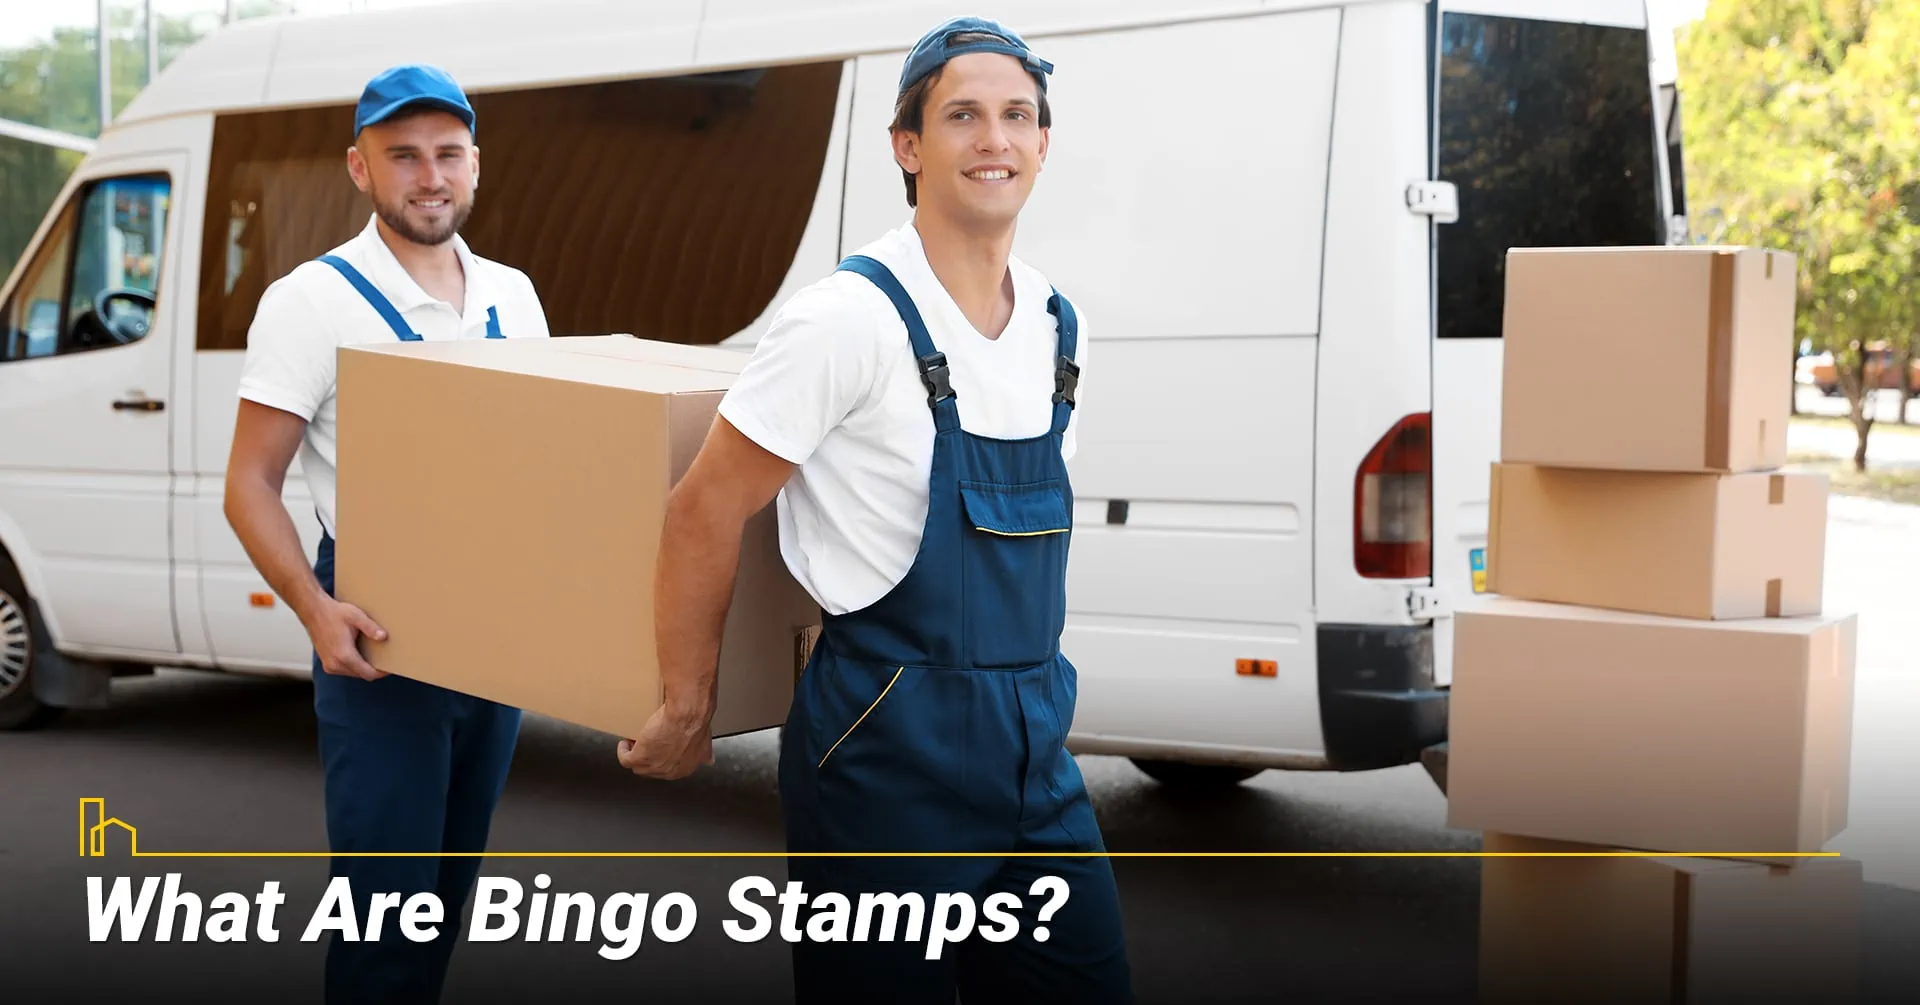 What Are Bingo Stamps?